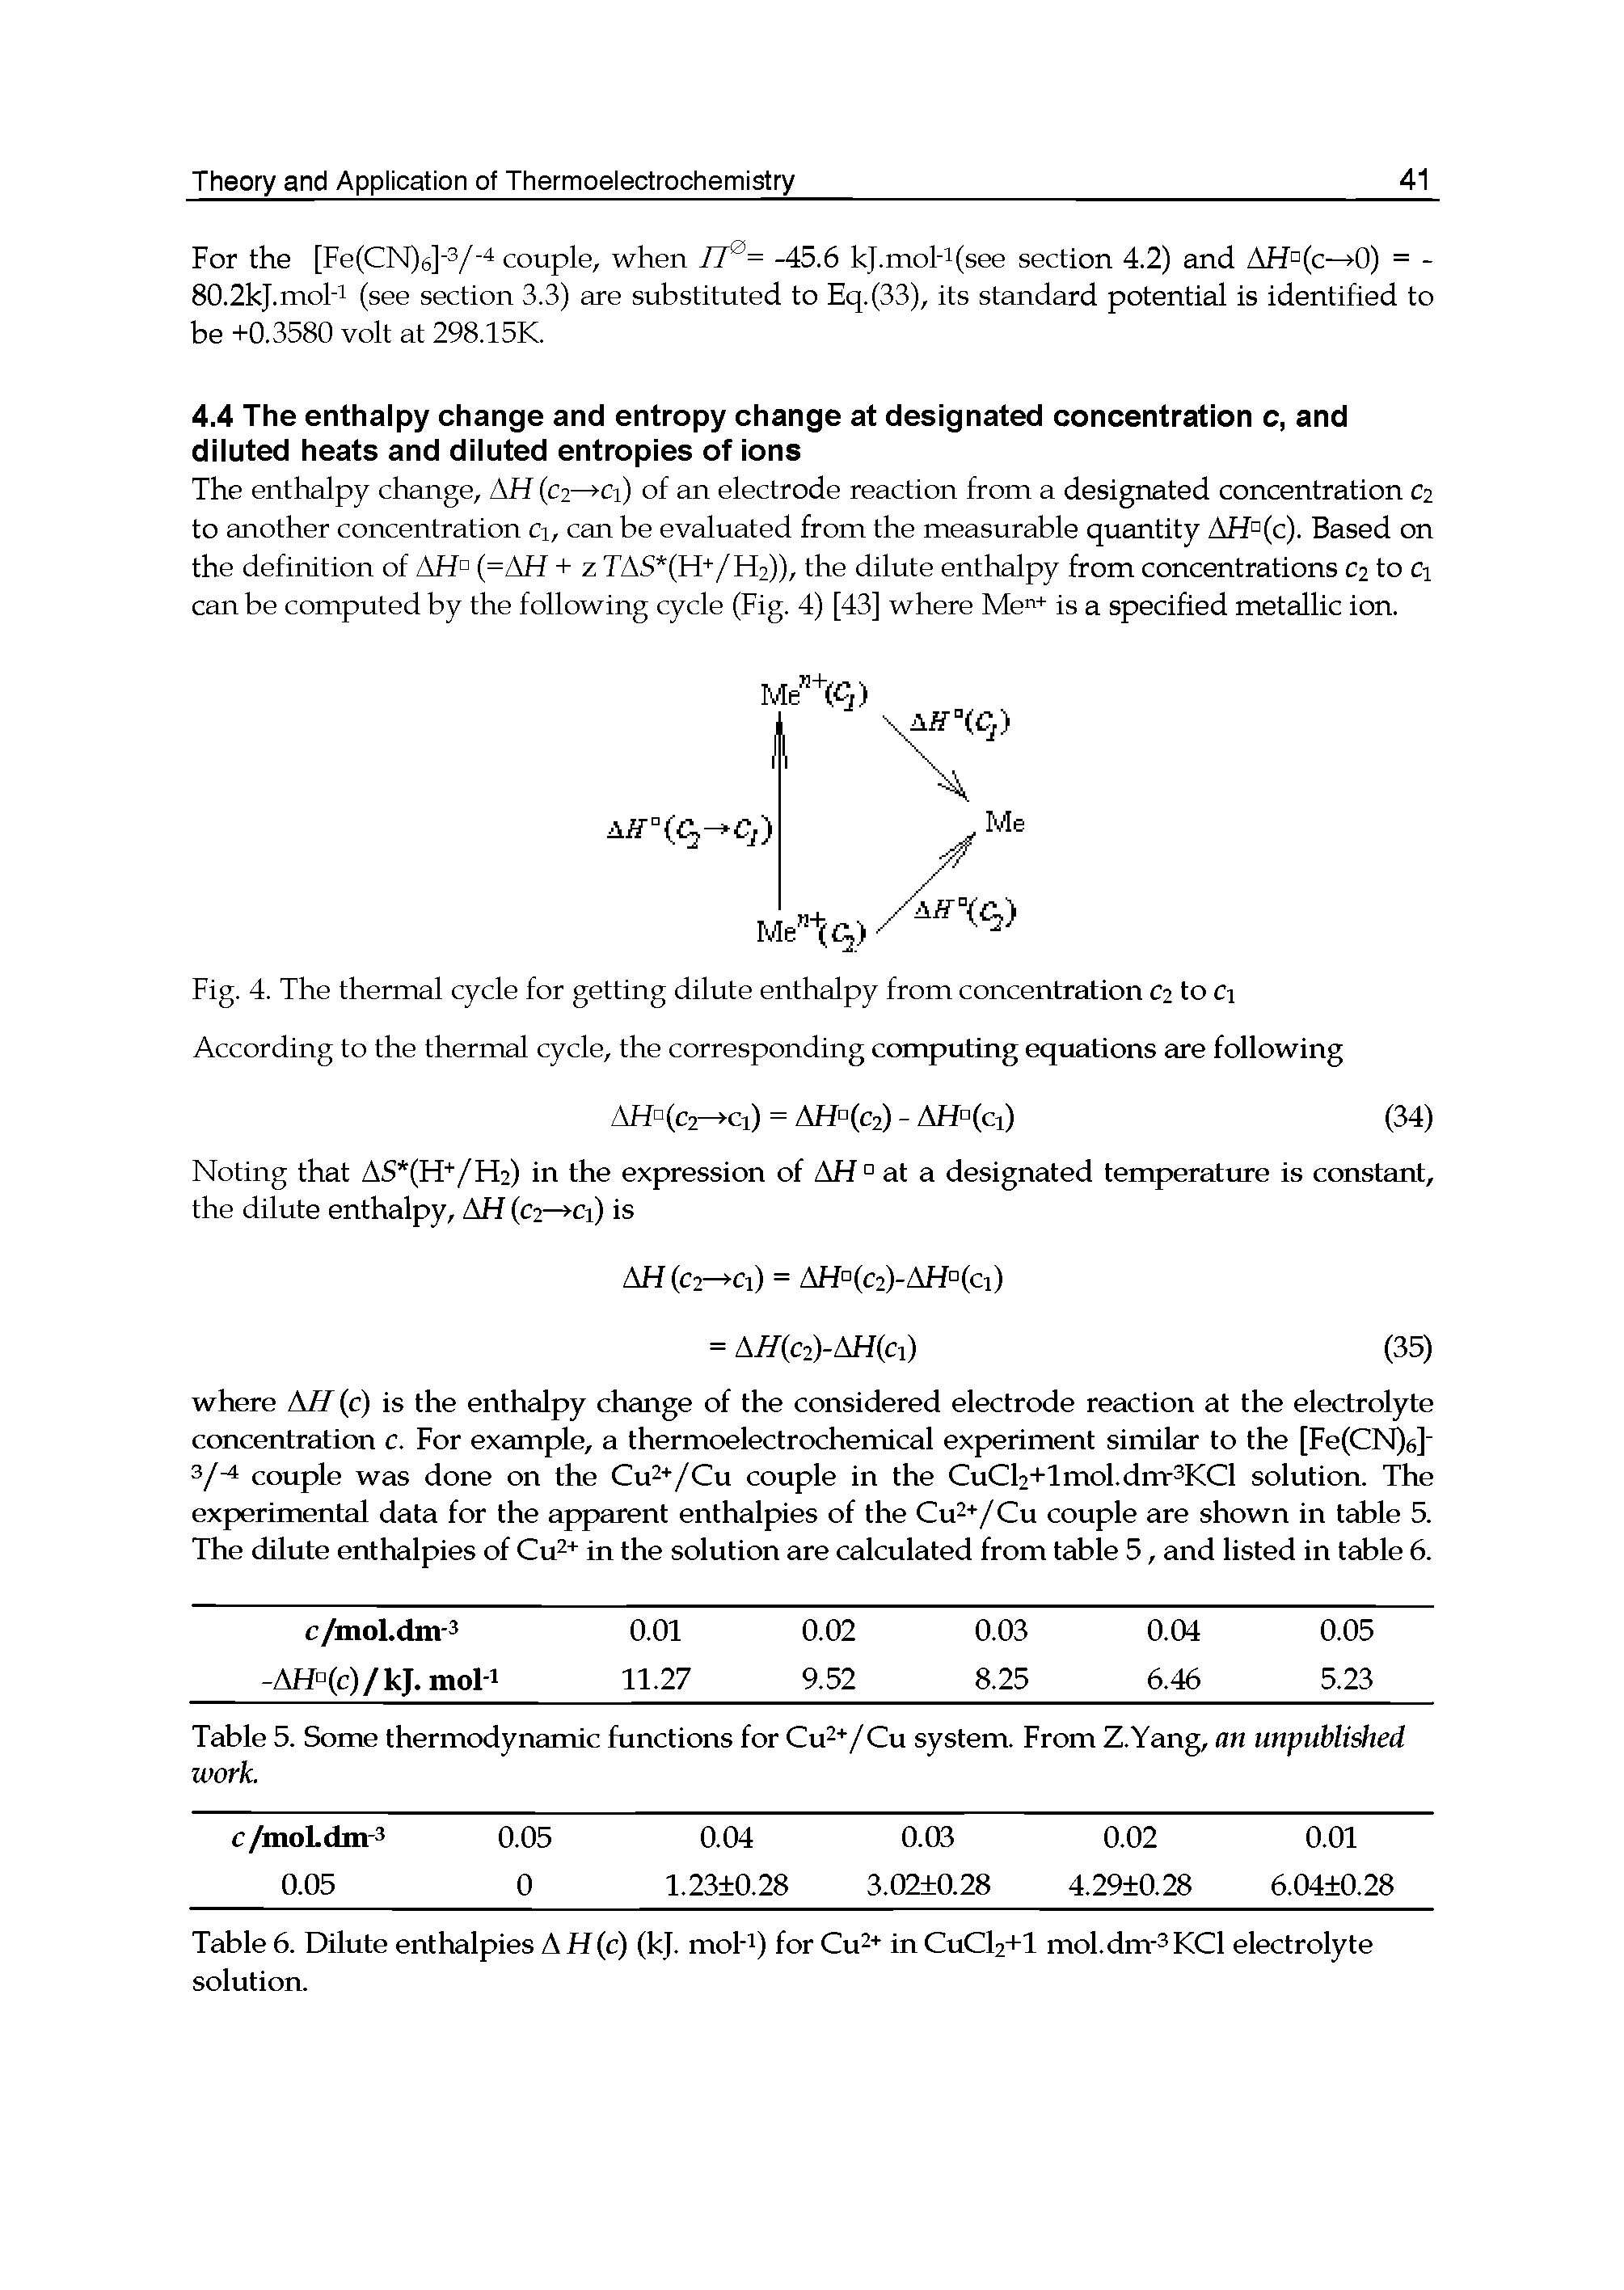 Fig. 4. The thermal cycle for getting dilute enthalpy from concentration Cz to Ci According to the thermal cycle, the corresponding computing equations are following...